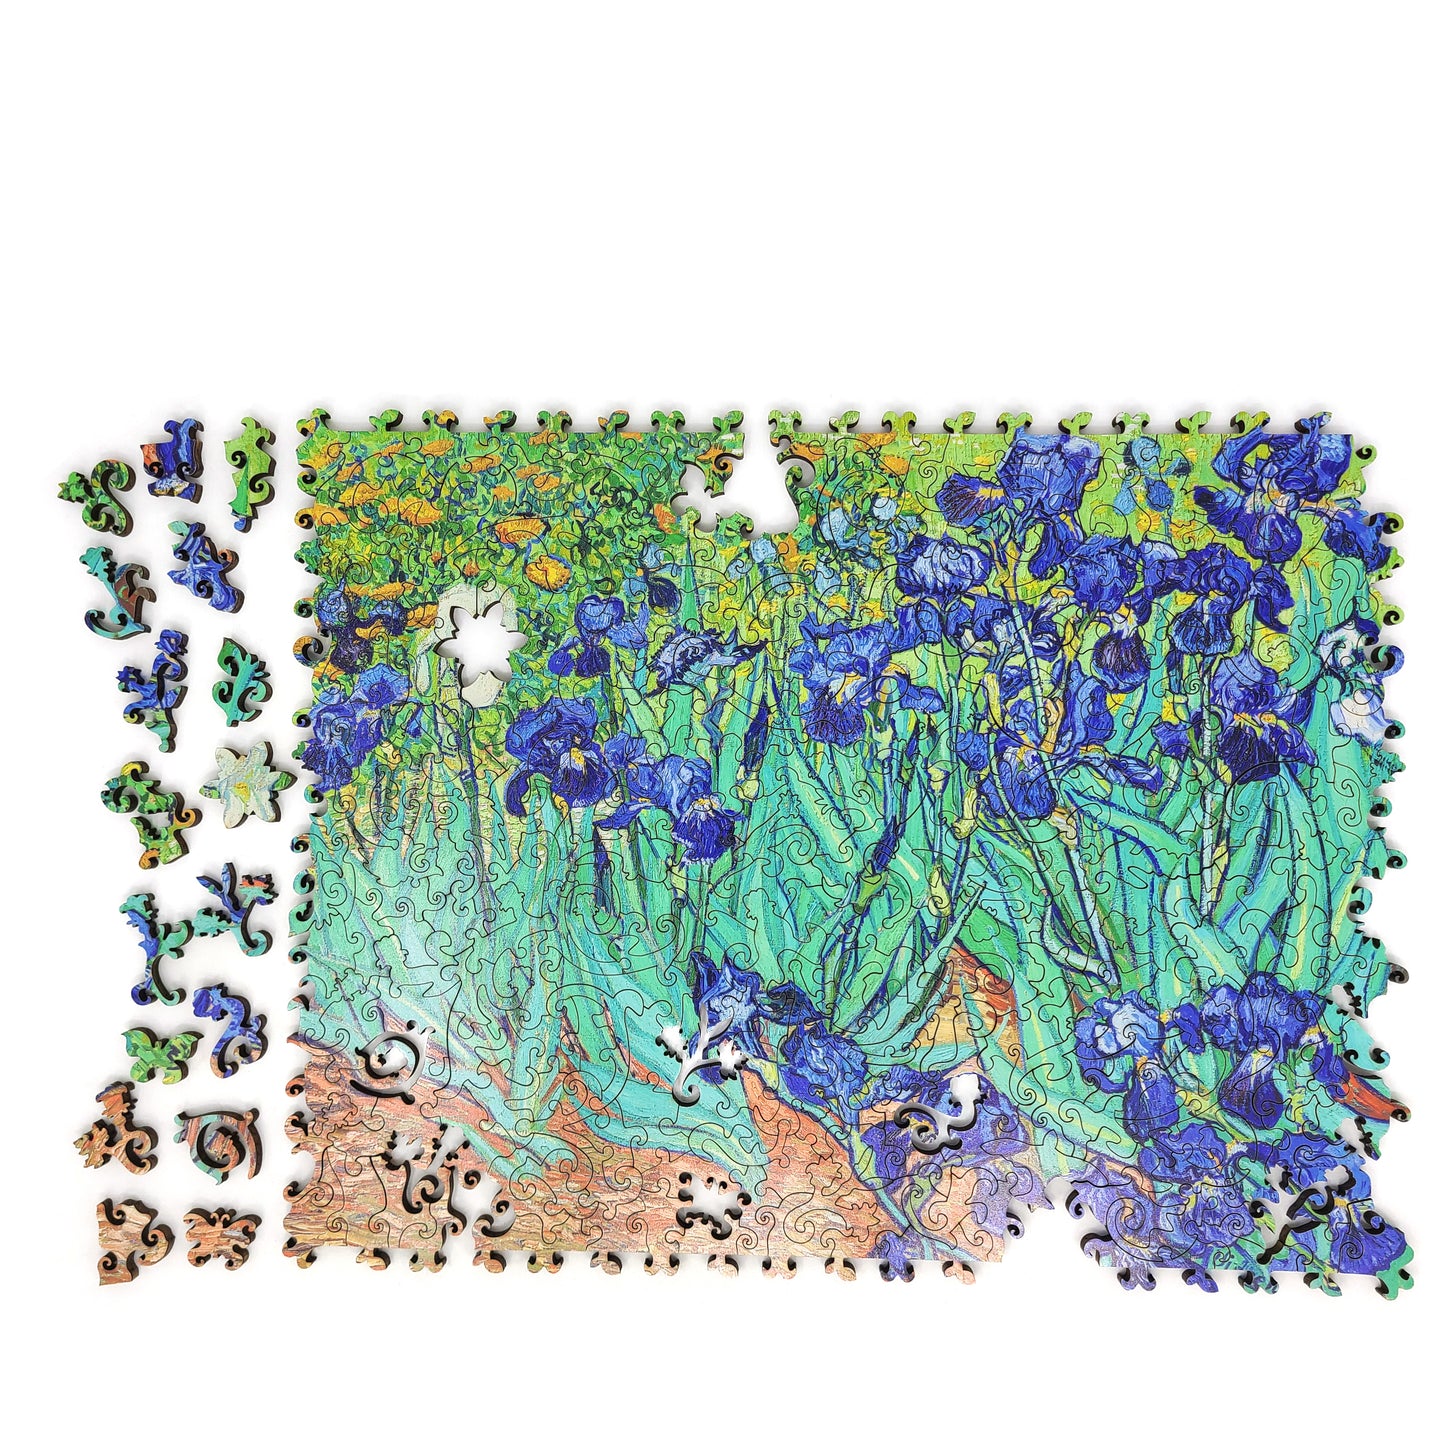 Wooden Jigsaw Puzzle with Uniquely Shaped Pieces for Adults - 290 Pieces - Irises